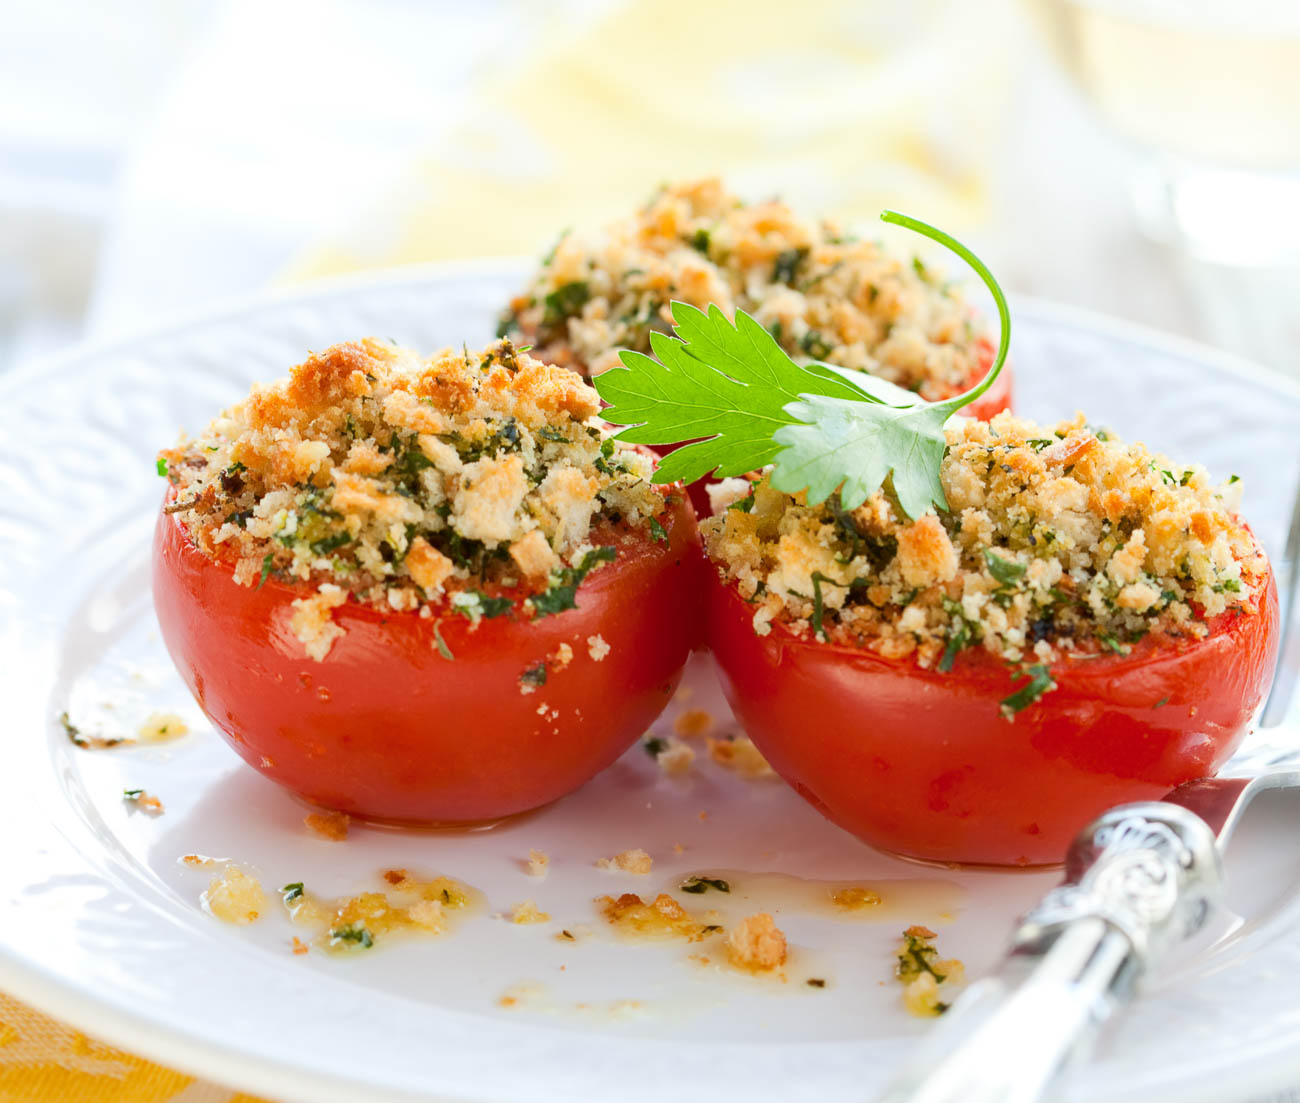 Provencal Style Grilled Stuffed Tomato Recipe